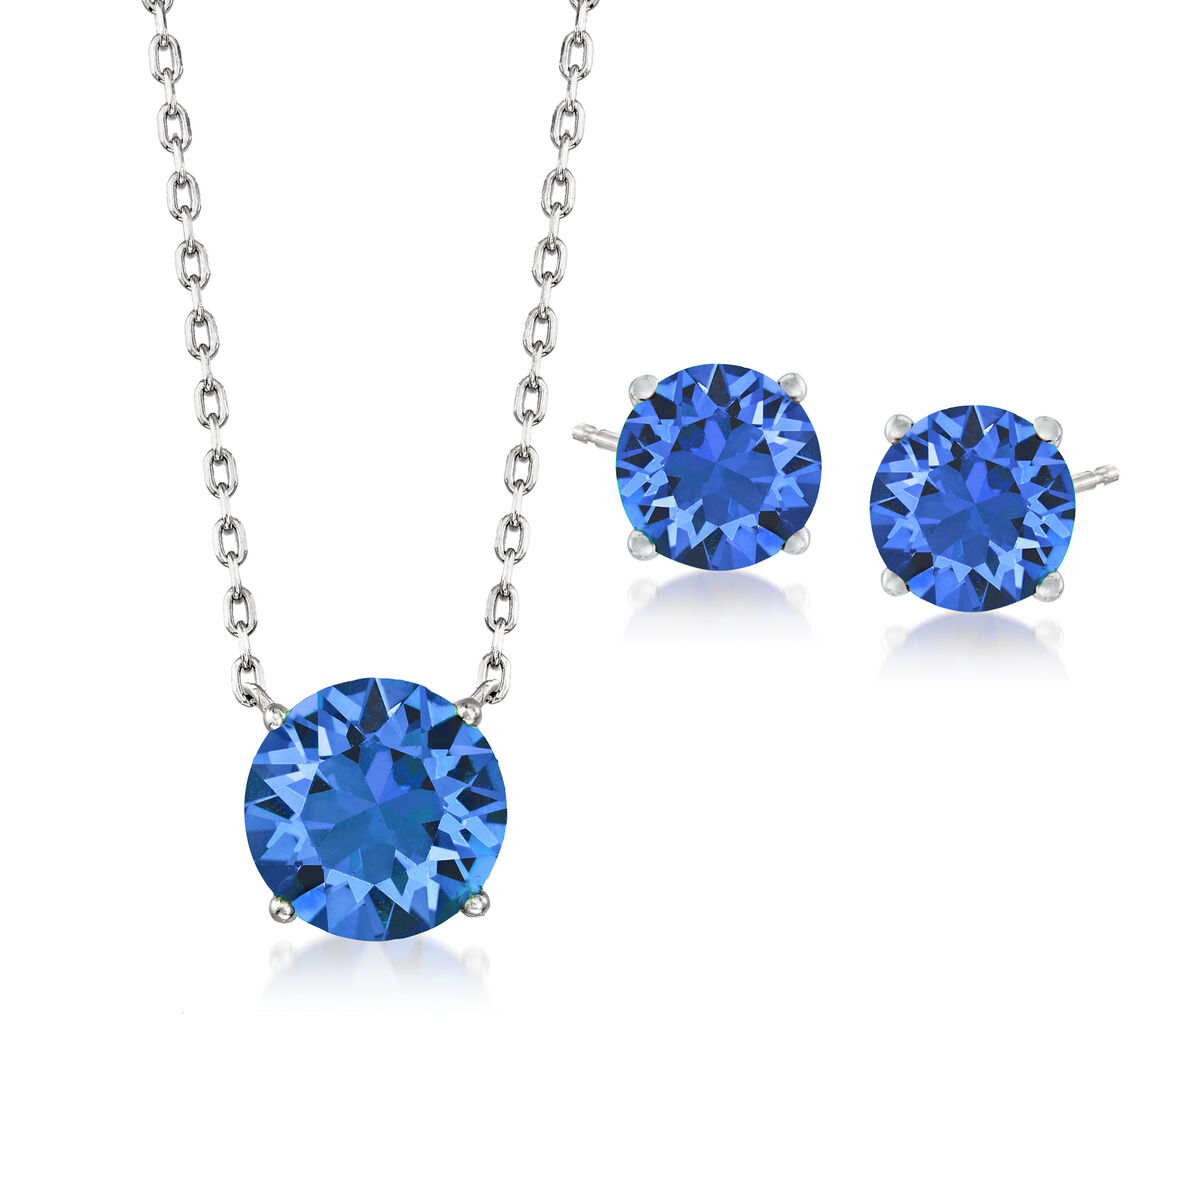 Jewelry Set: Dark Blue Swarovski Crystal Necklace and Earrings in Sterling  Silver | Ross-Simons